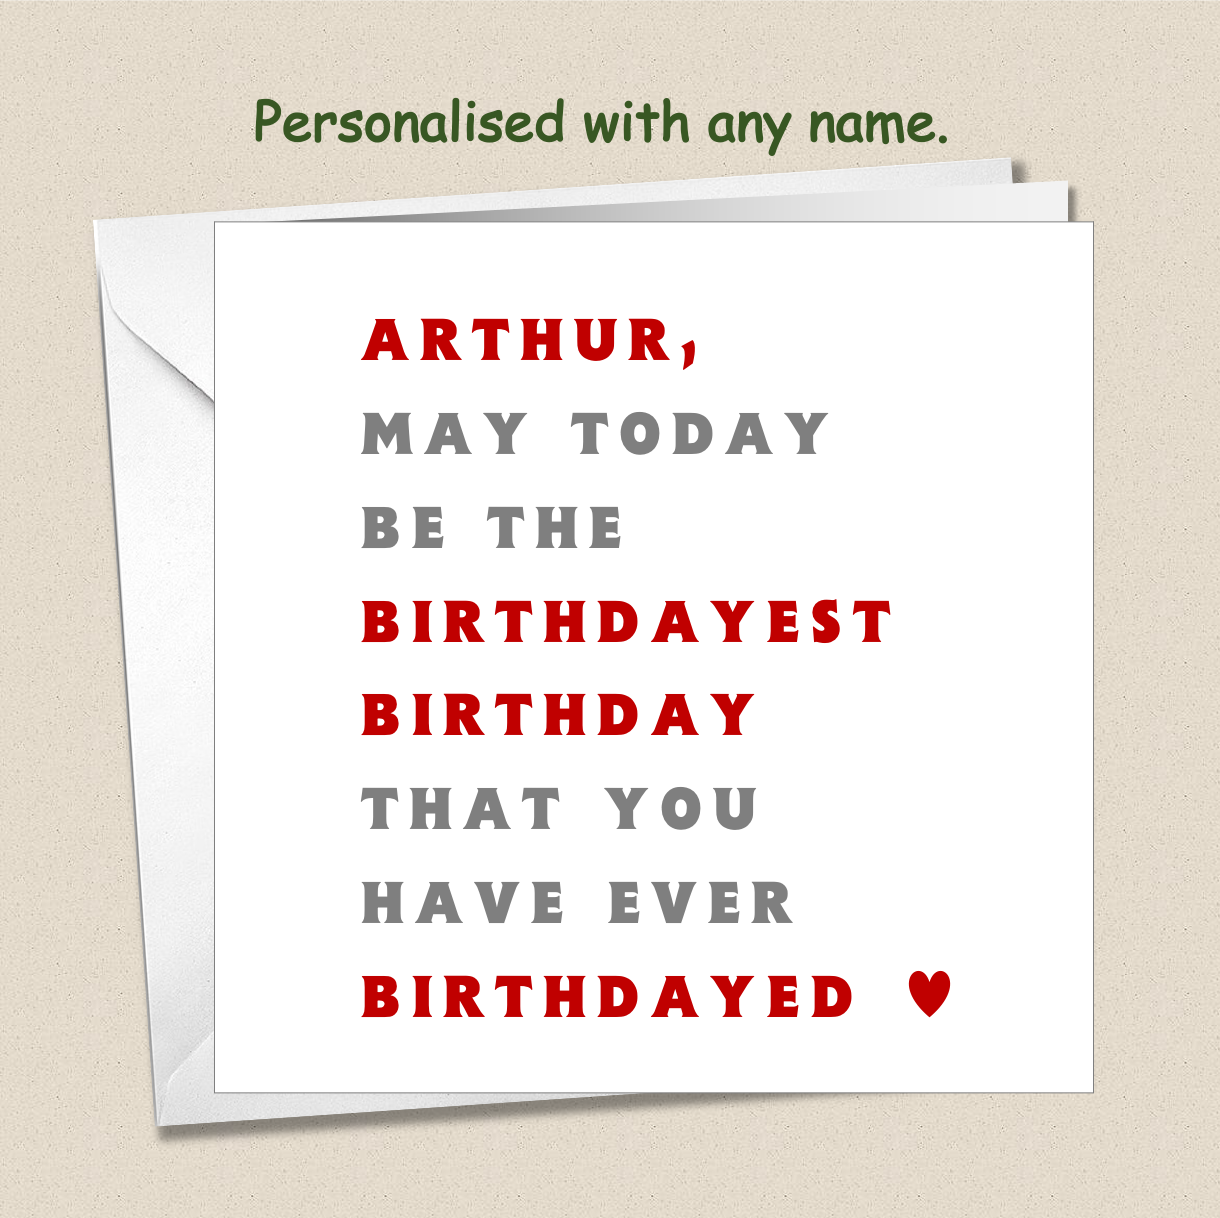 Personalised Male Birthday Card humorous funny - Birthdayest - For Him